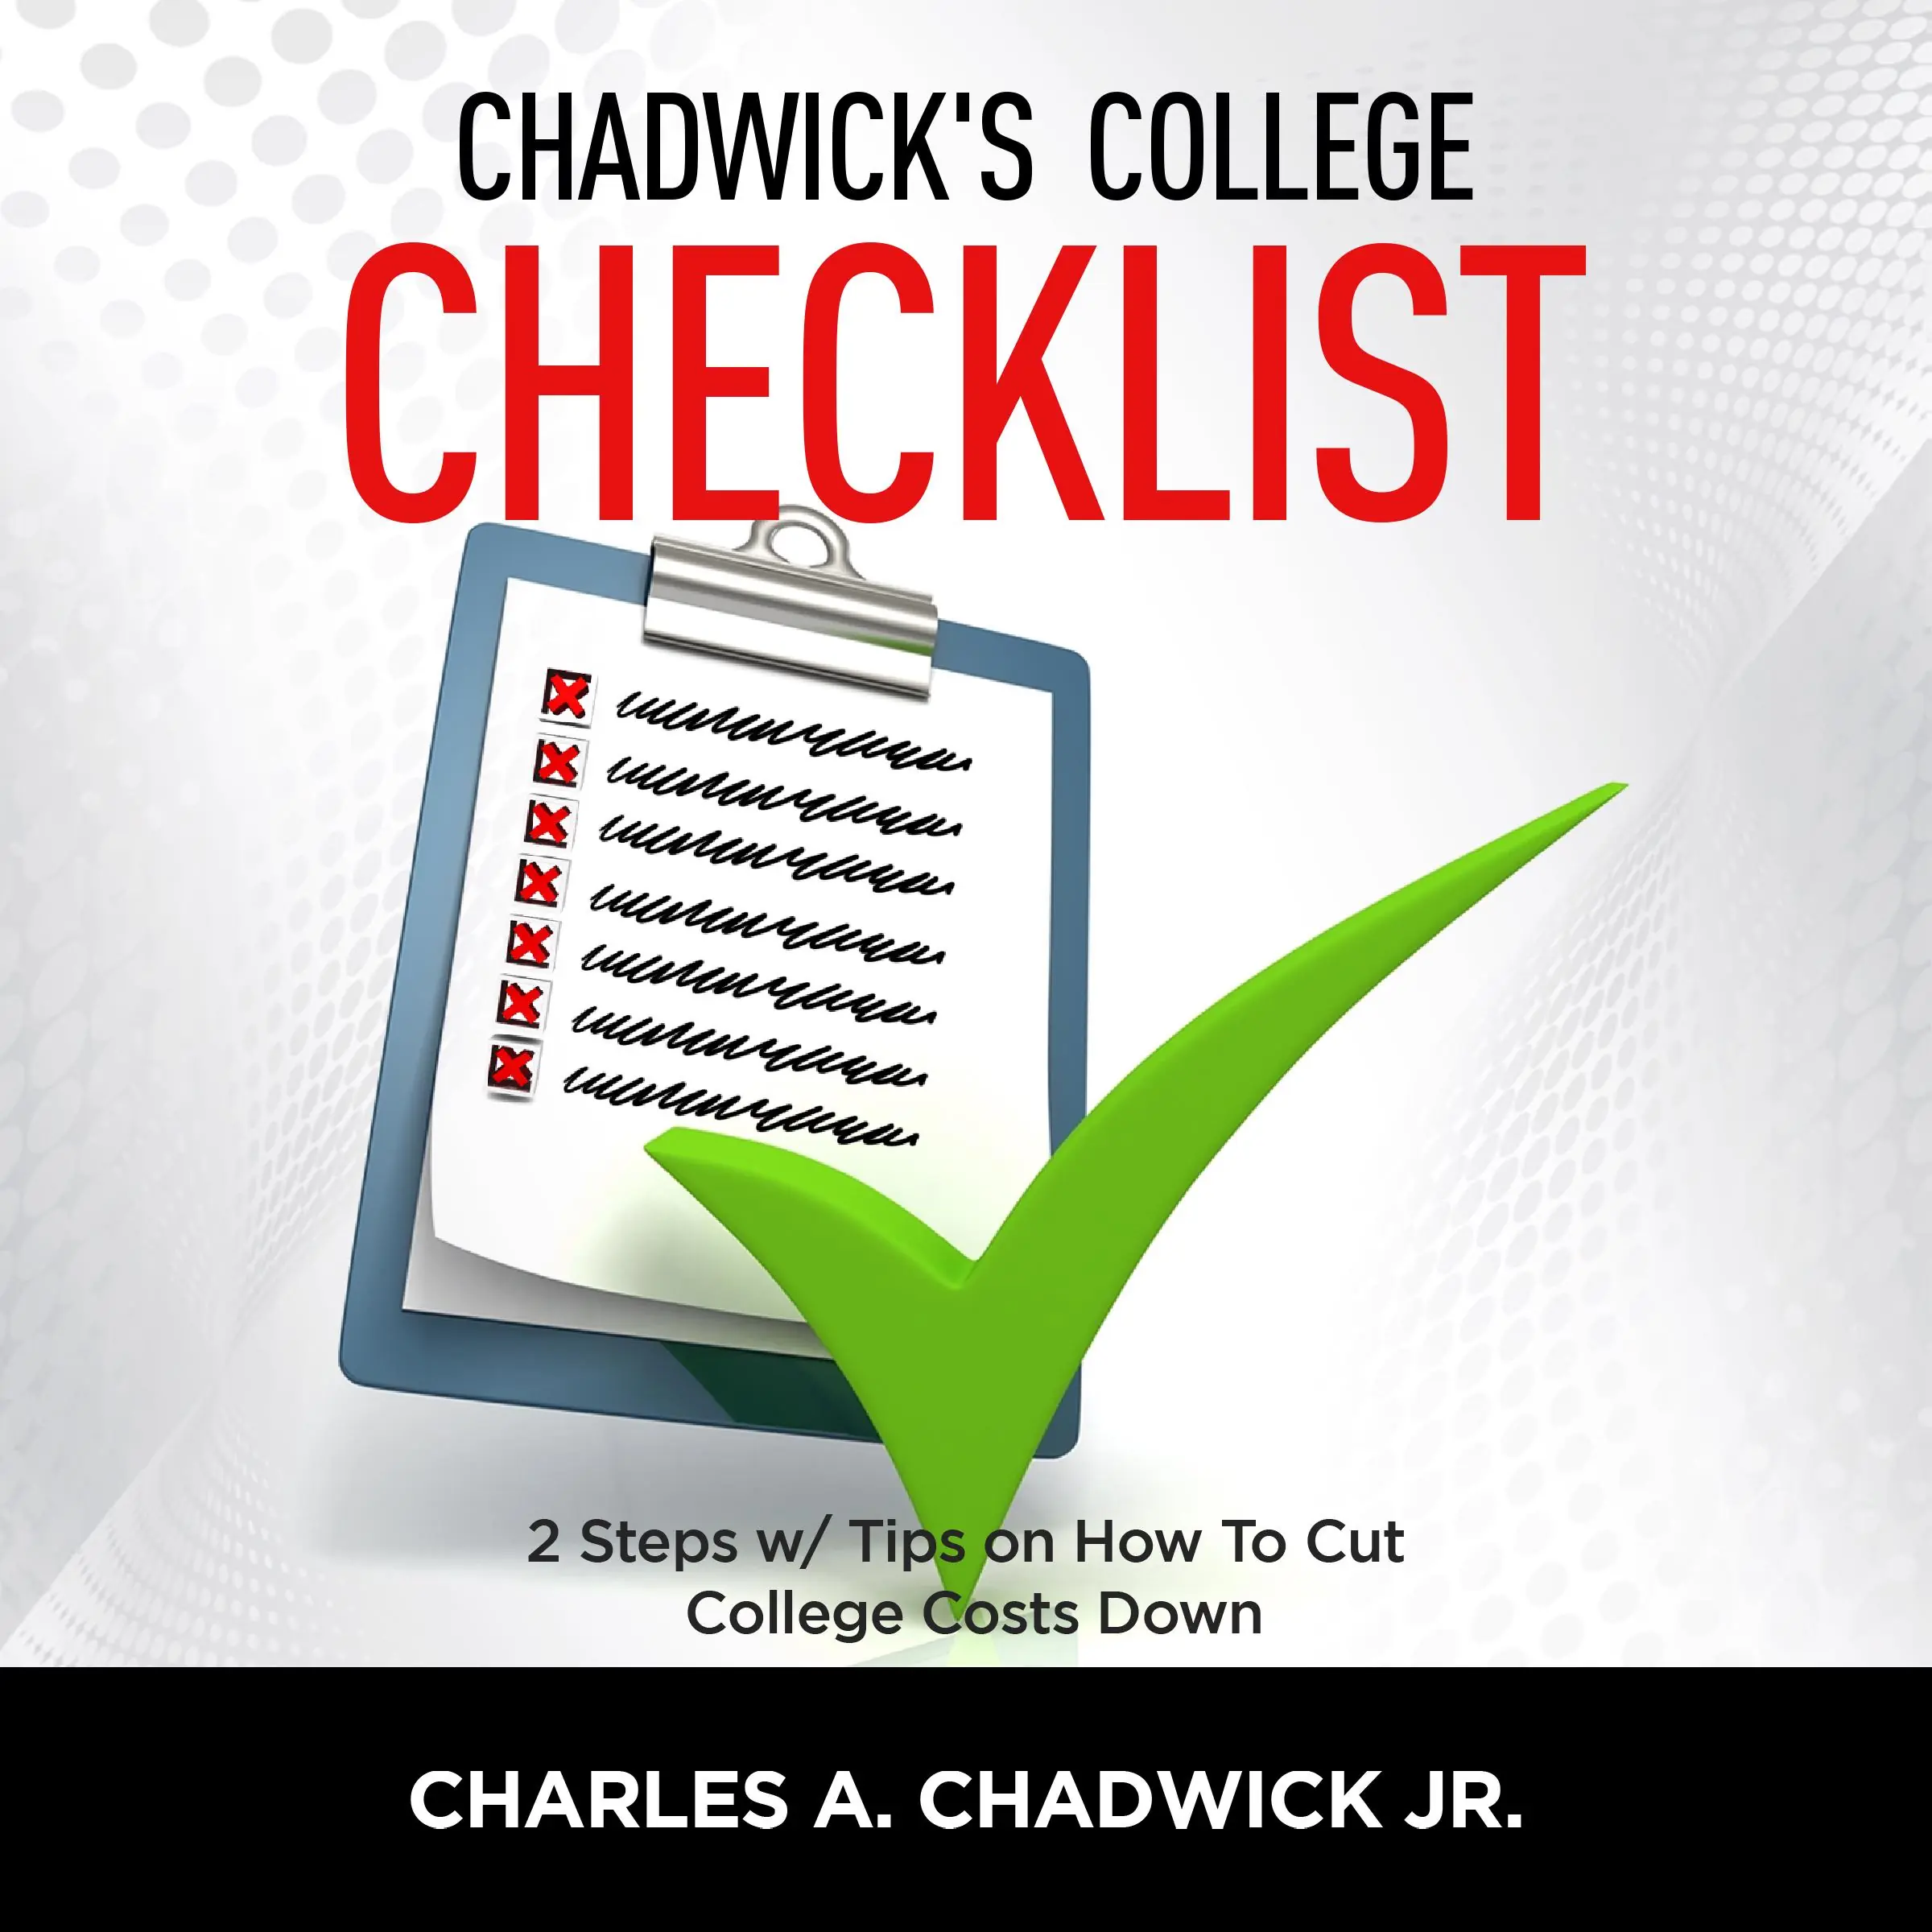 Chadwick's College Checklist 2 Steps w/Tips on How To Cut College Costs Audiobook by Charles Chadwick Jr.